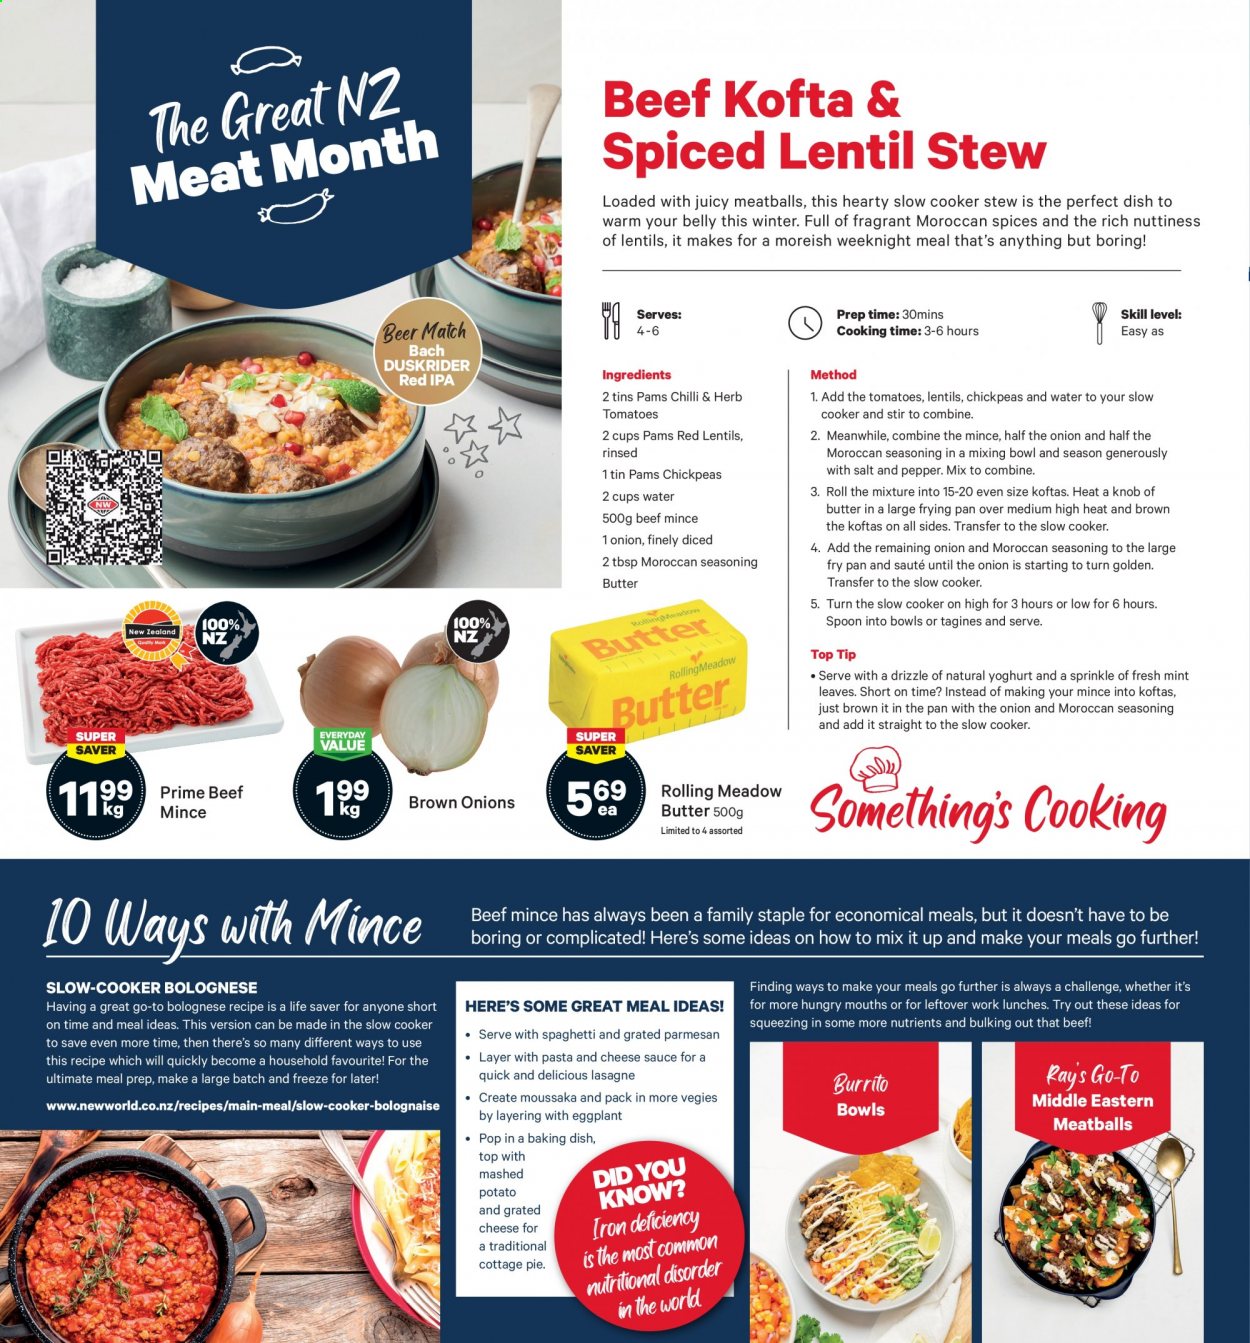 thumbnail - New World mailer - 03.05.2021 - 09.05.2021 - Sales products - spaghetti, meatballs, burrito, parmesan, grated cheese, yoghurt, butter, lentils, chickpeas, red lentils, pepper, spice, beer, IPA, beef meat, kofta. Page 2.